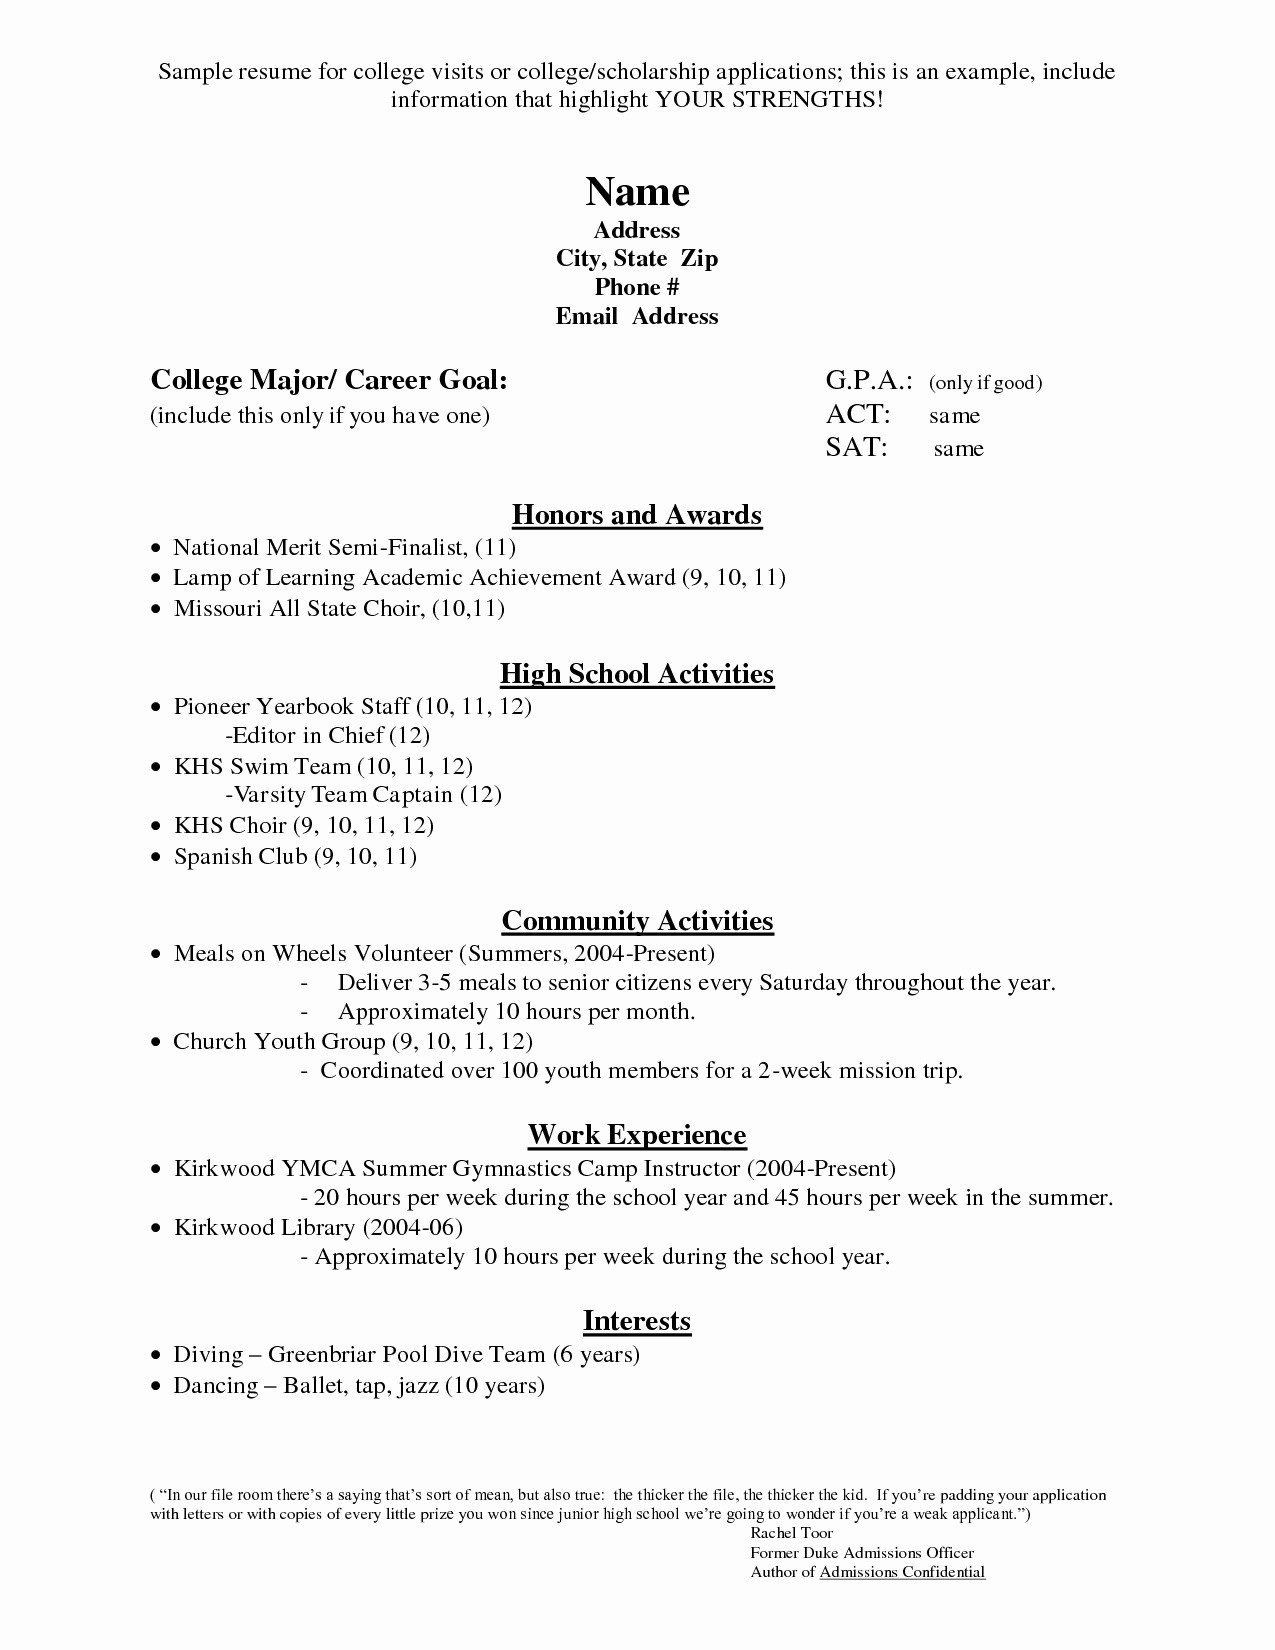 Sample High School Student Resume for College Application Computer Science Student Resume No Experience 010 Template Ideas …